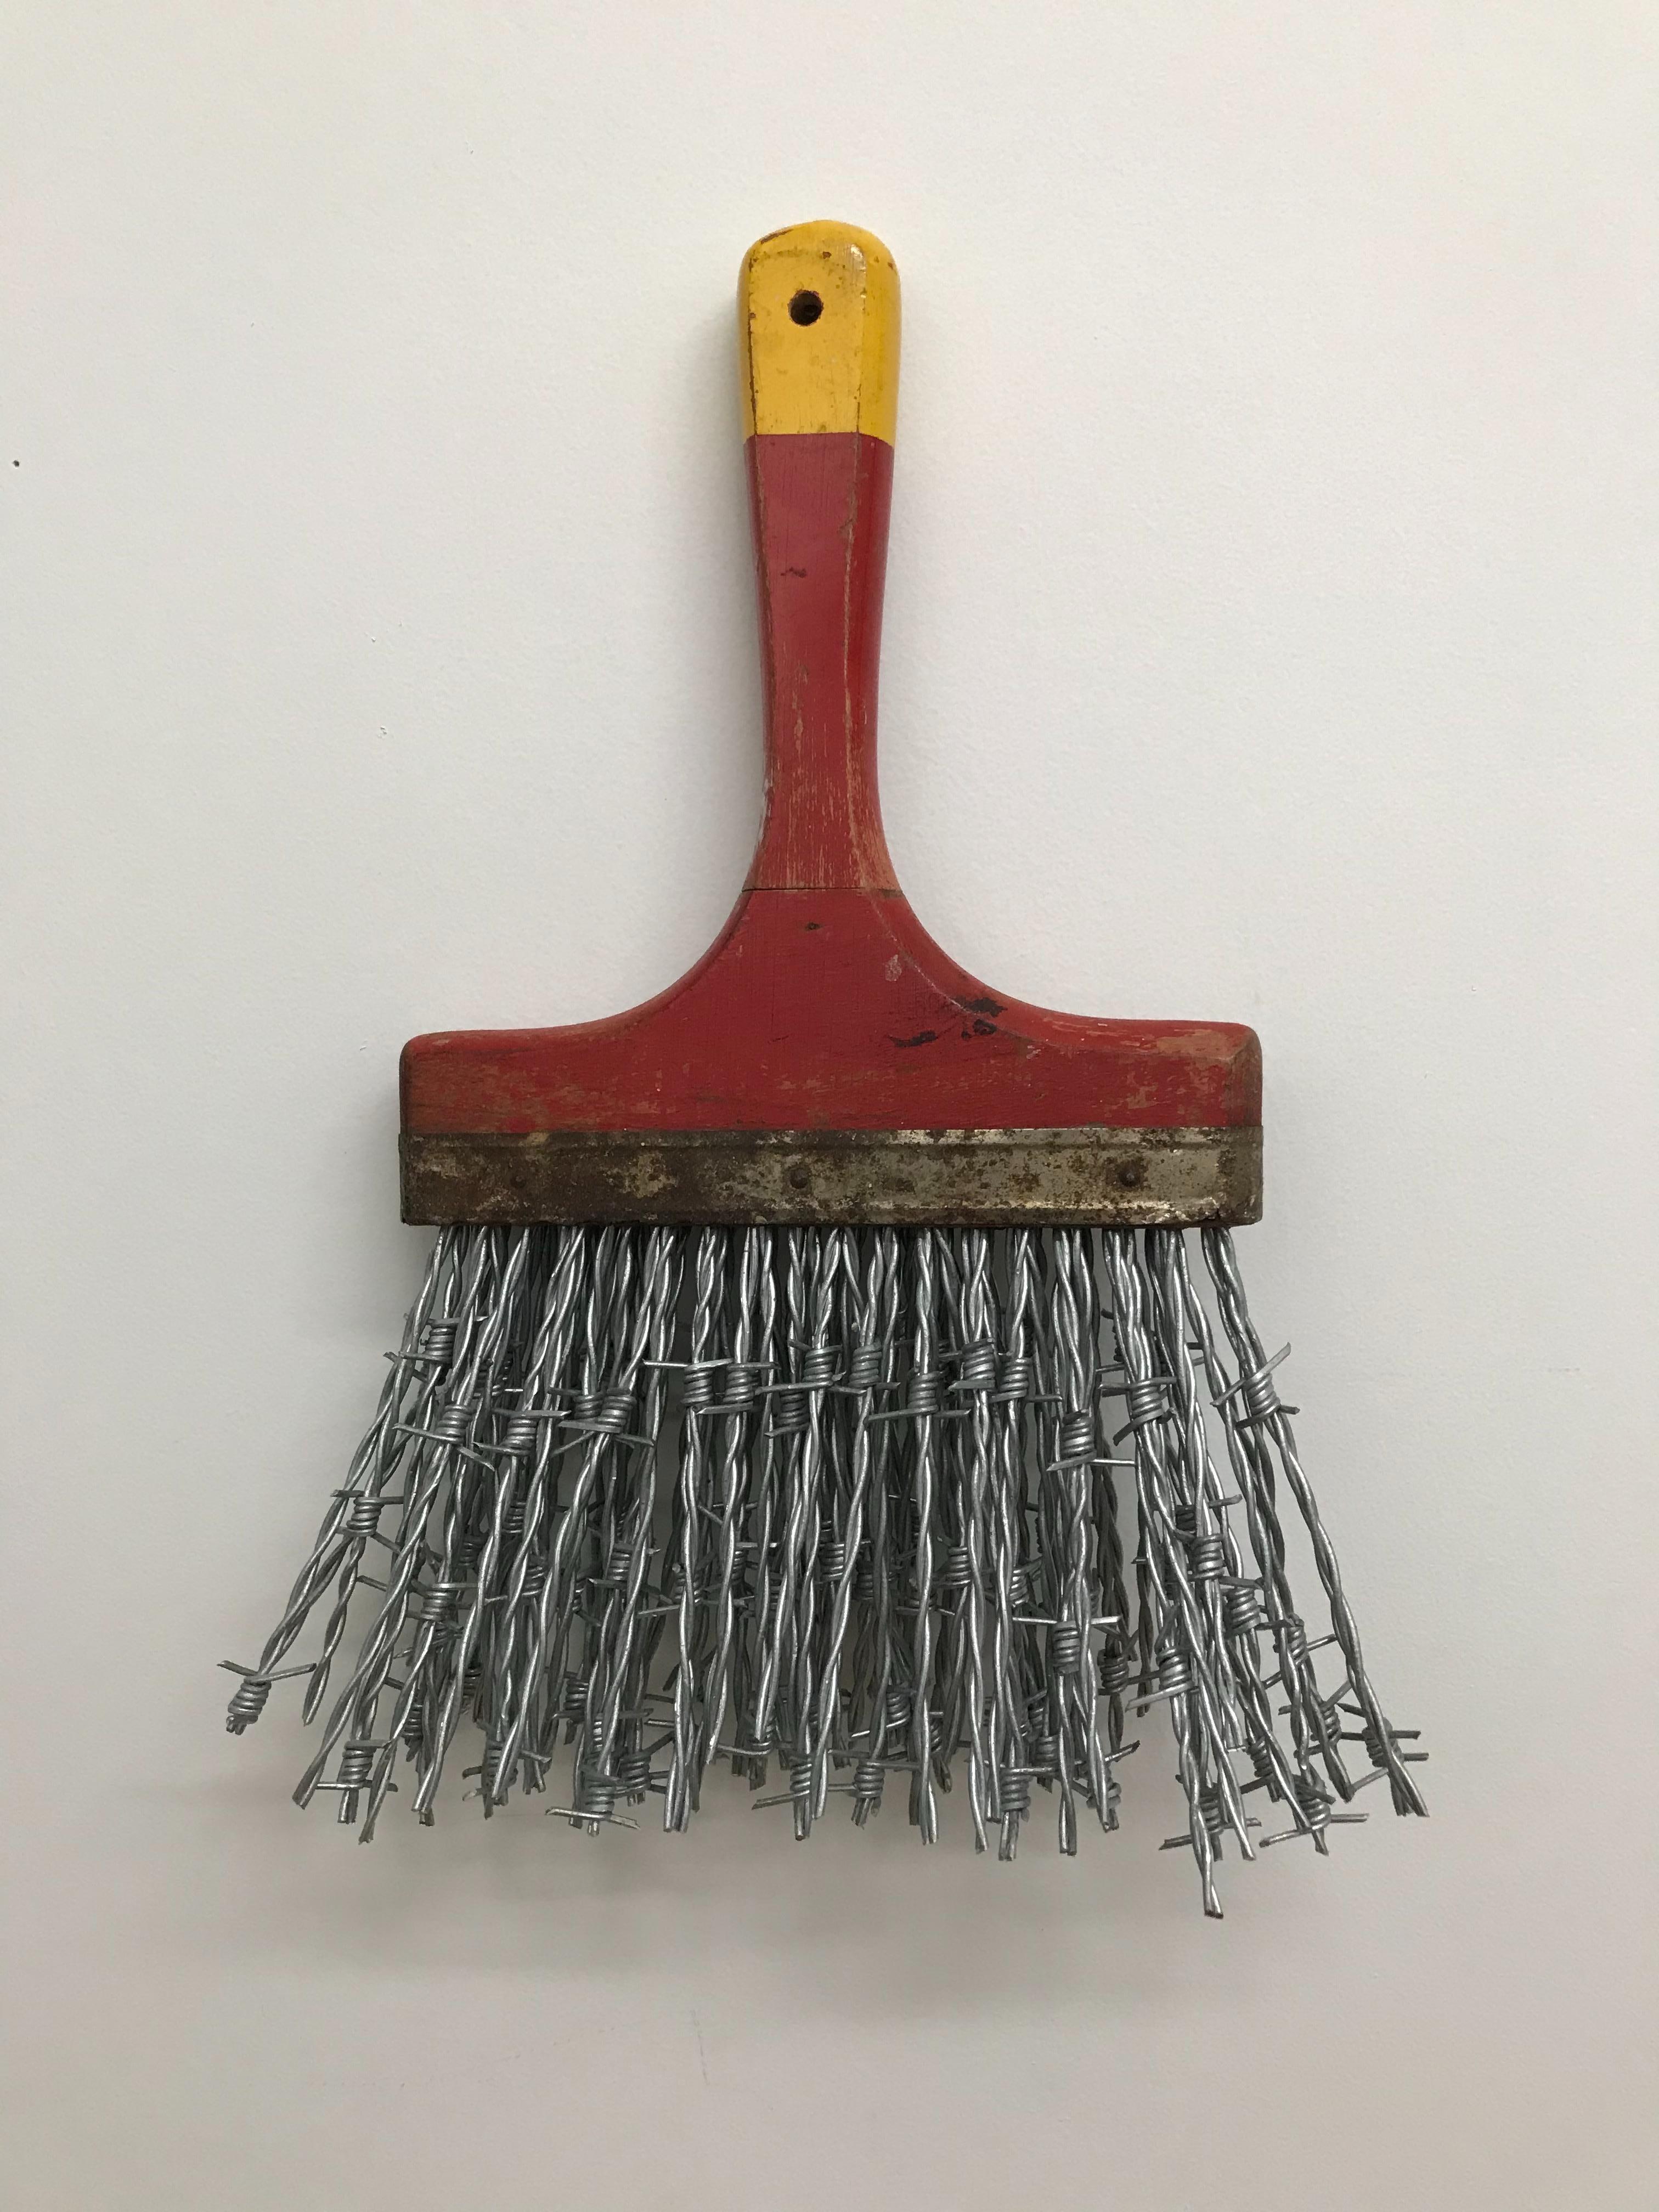 "Barbed Wire Brush", Contemporary, Mixed Media, Sculpture, Found Objects - Mixed Media Art by Howard Jones